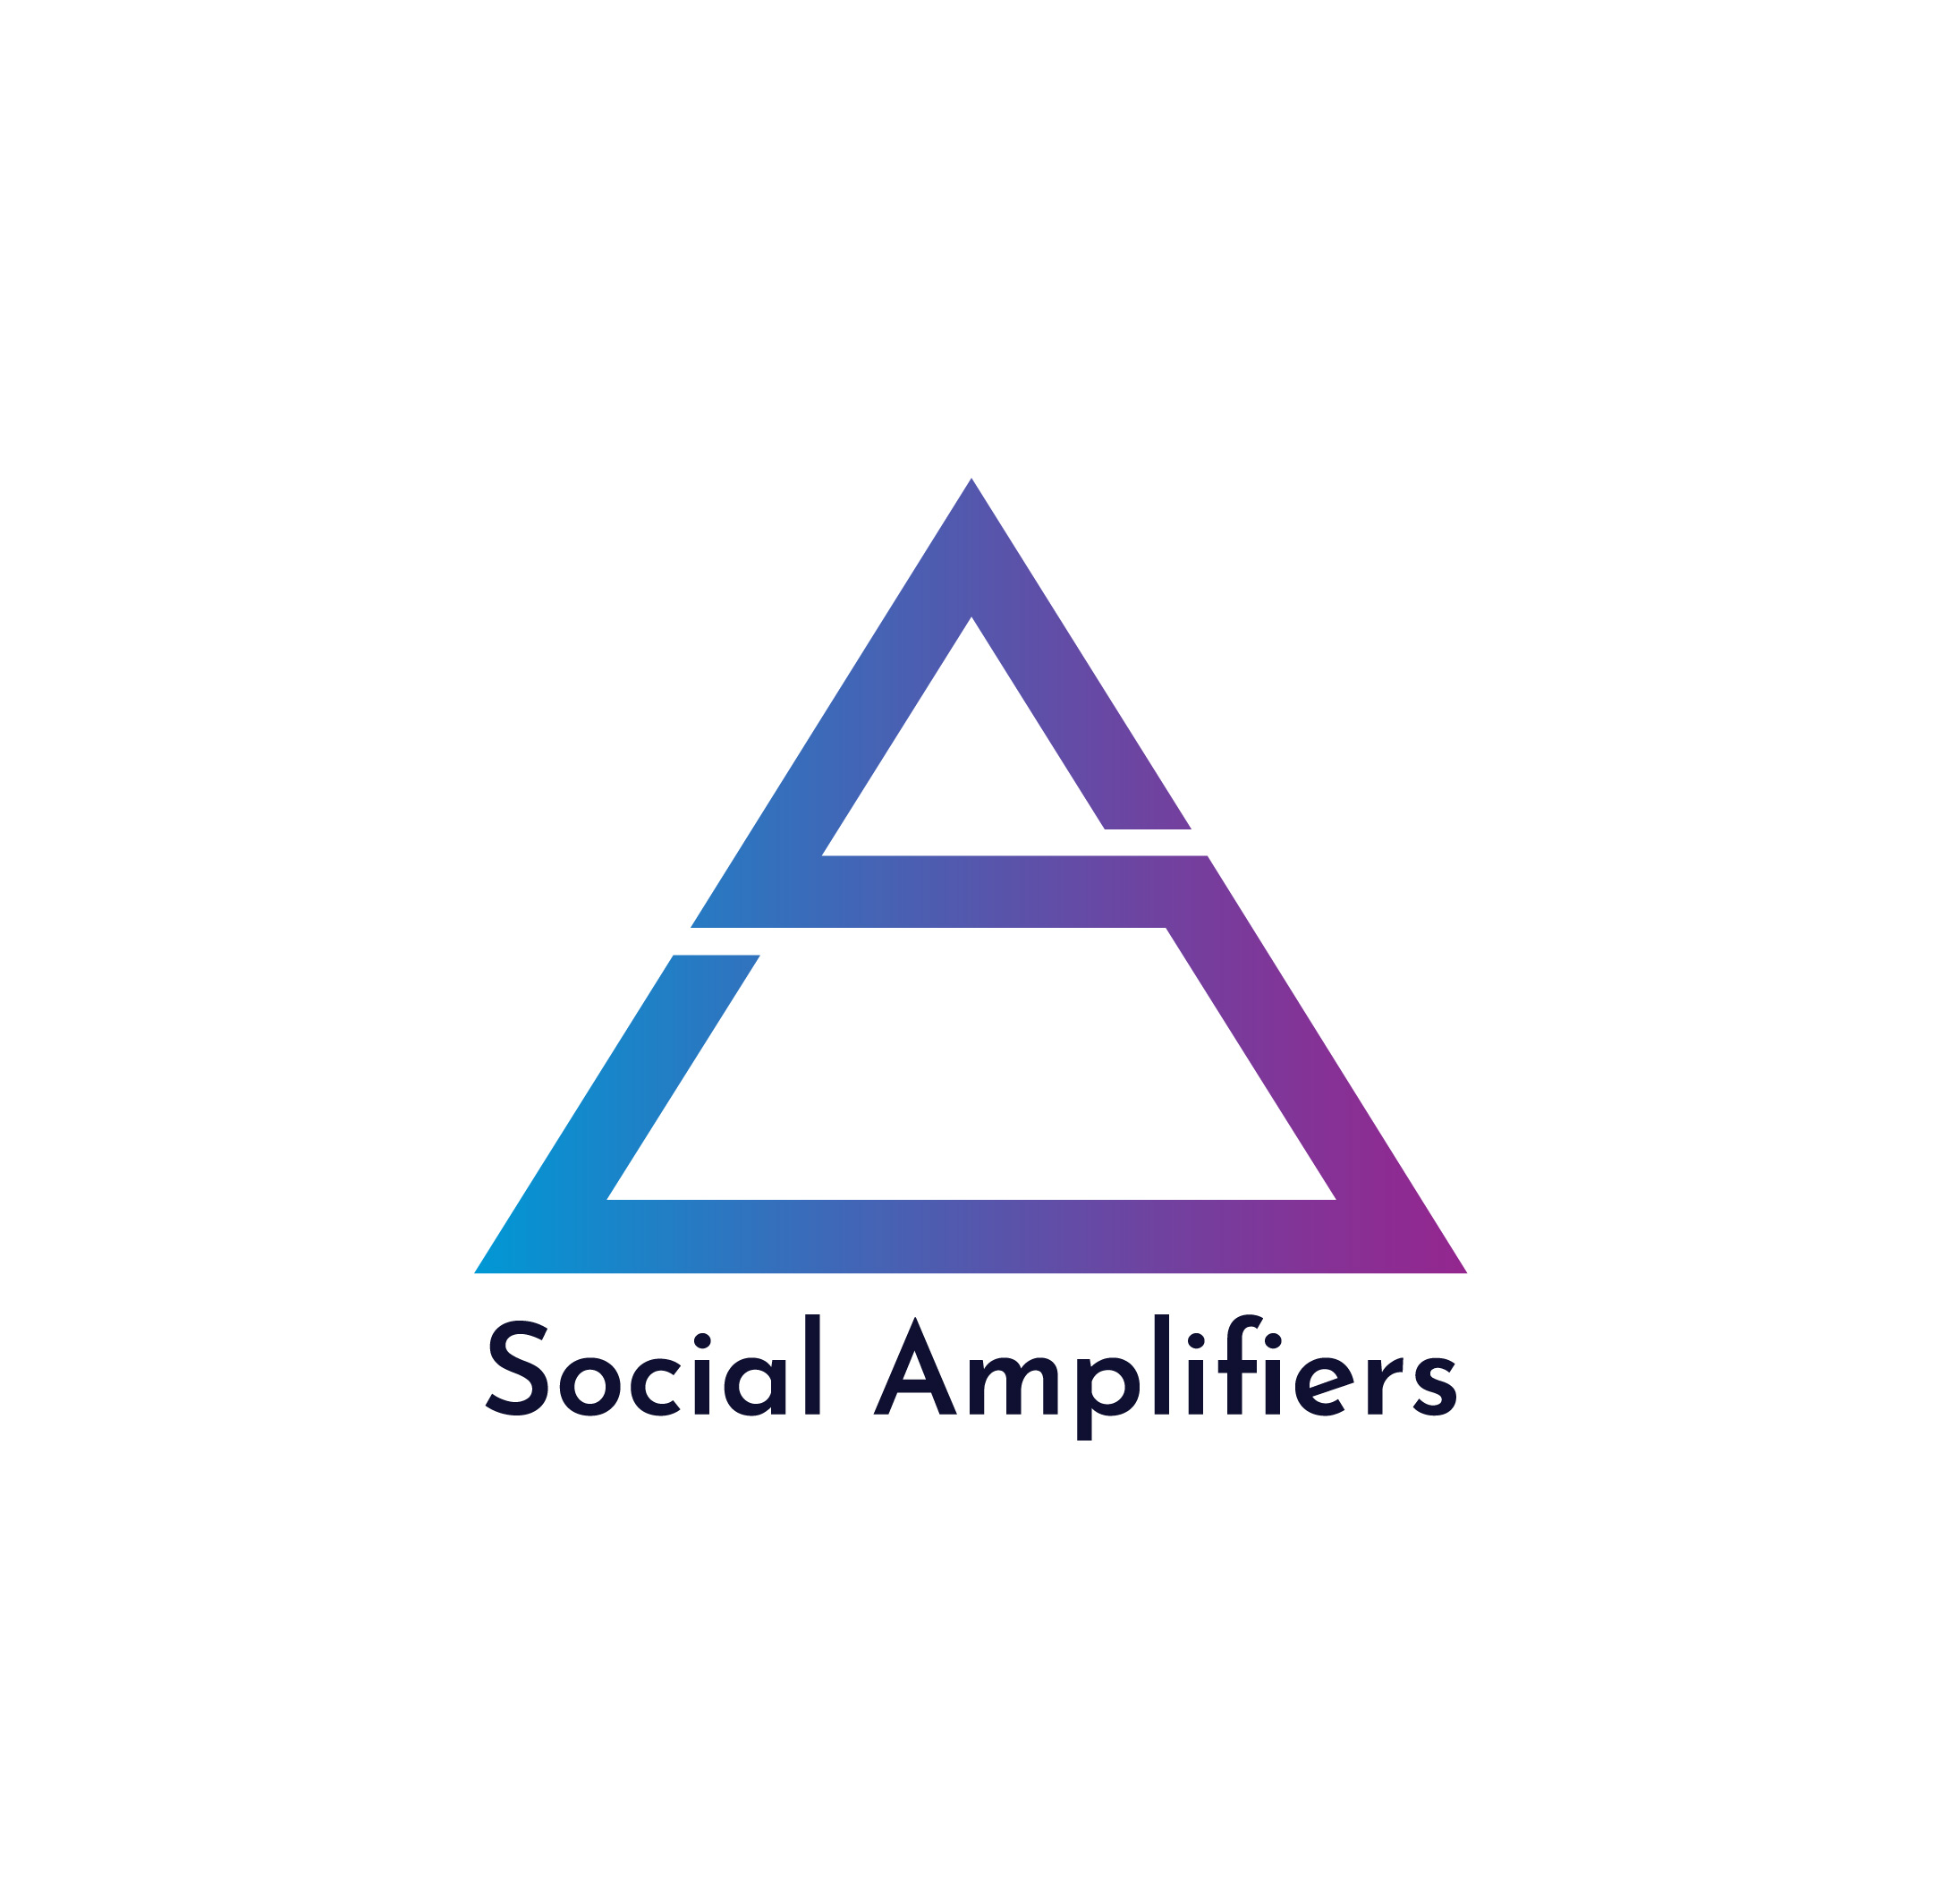 Social Amplifiers - Social Amplifiers is the next iteration of digital marketing - It is India's leading Digital and Social Media Agency that amplifies social media campaigns of brands.